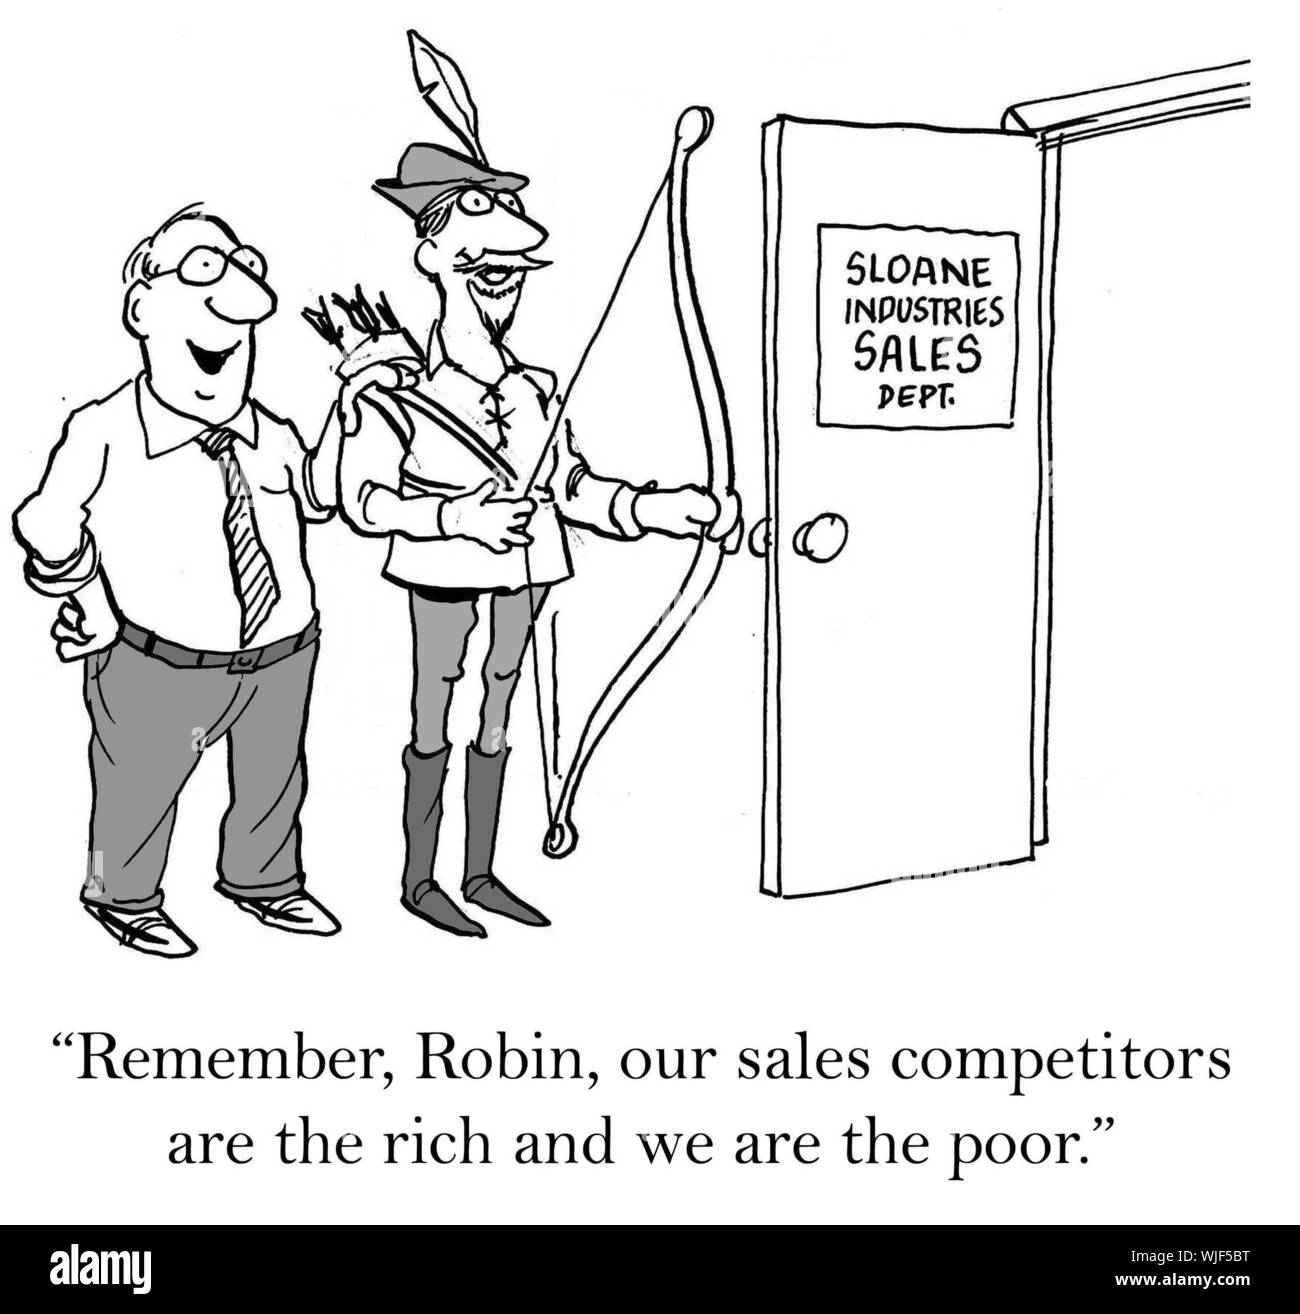 'Remember, Robin, our sales competitors are the rich and we are the poor.' Stock Photo